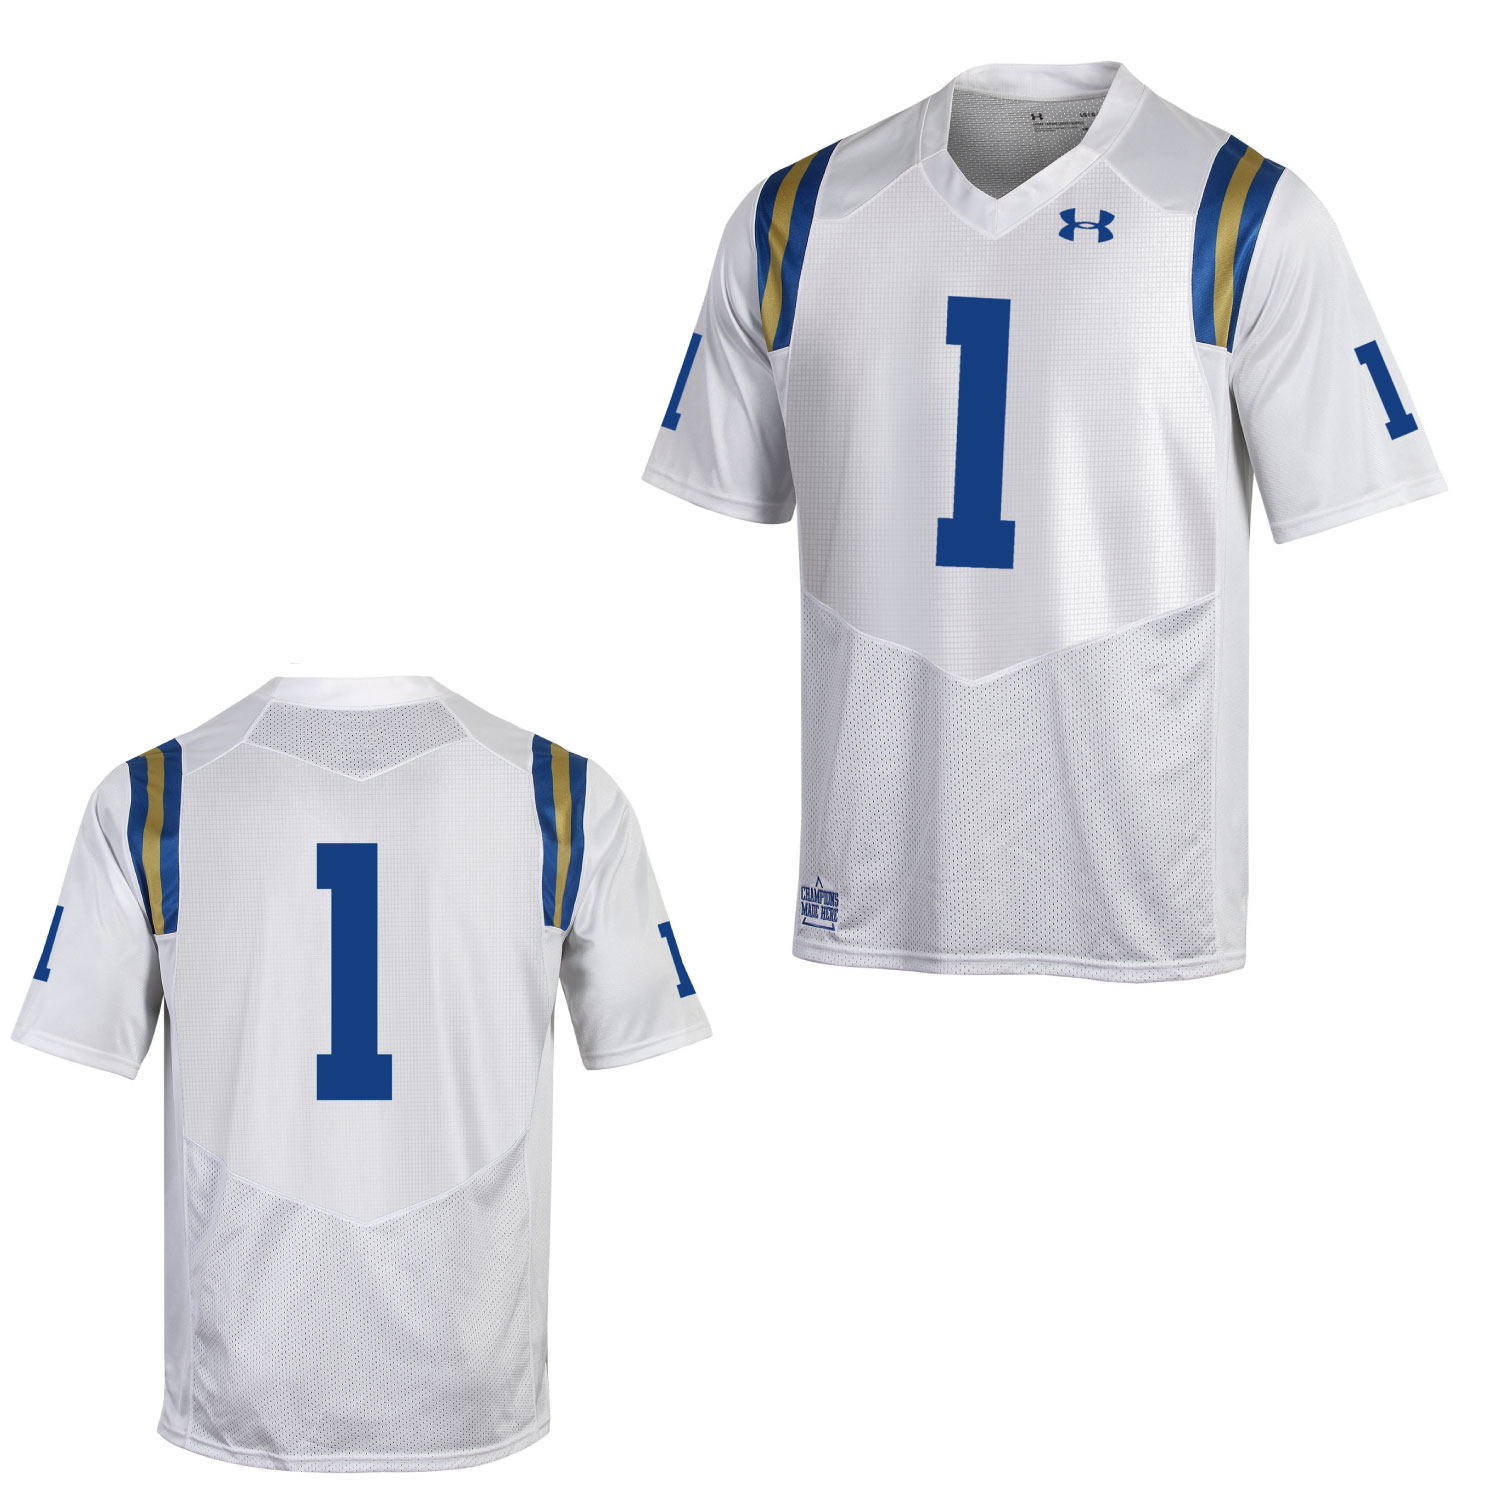 Under Armour UCLA Bruins  White #1 Sideline Replica Football Jersey